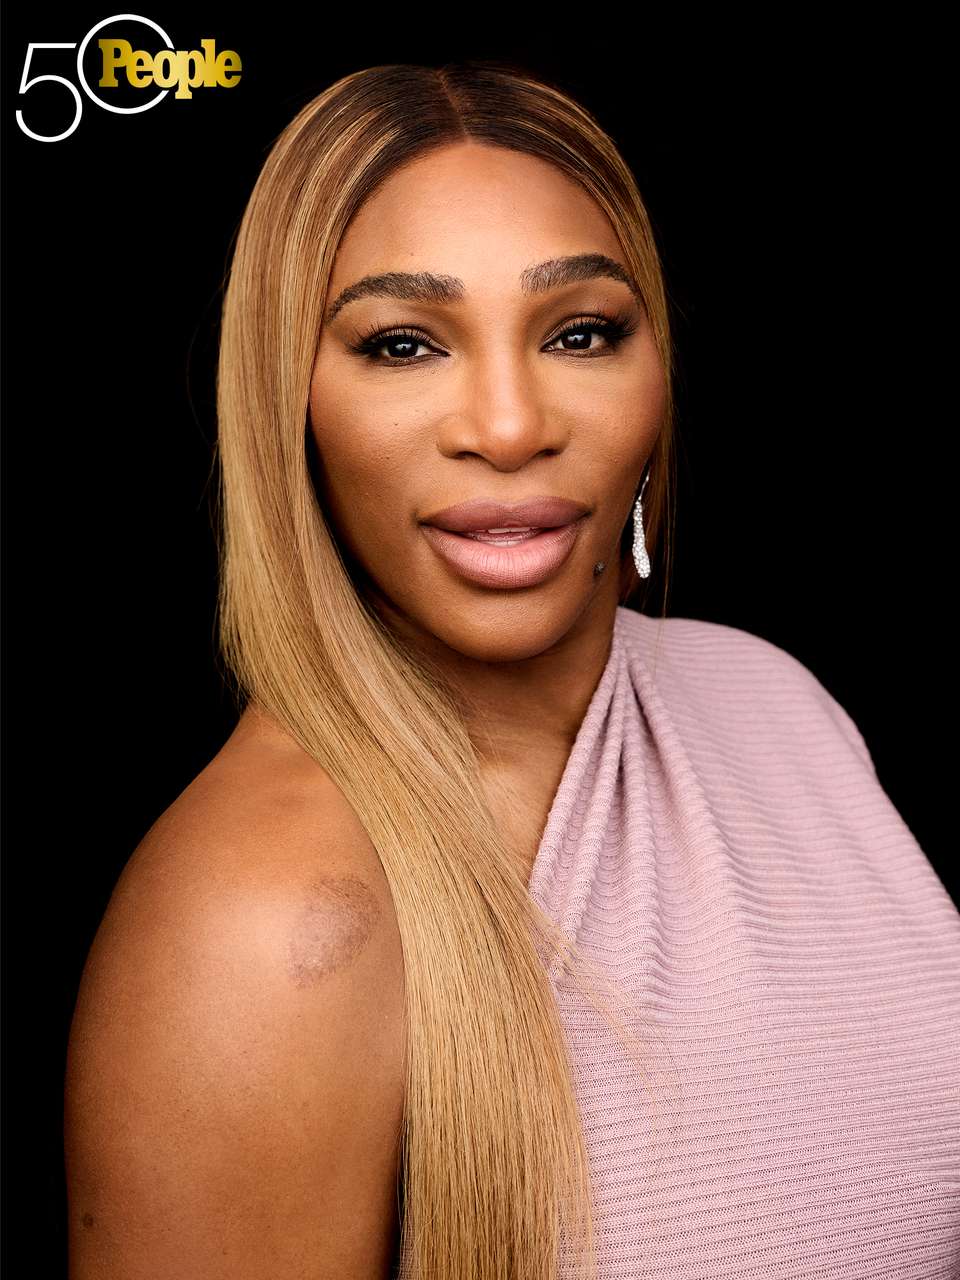 People 50th Anniversary SERENA WILLIAMS Photographed 2/5/24 - at the Hilton West Palm Beach in West Palm Beach, Florida.